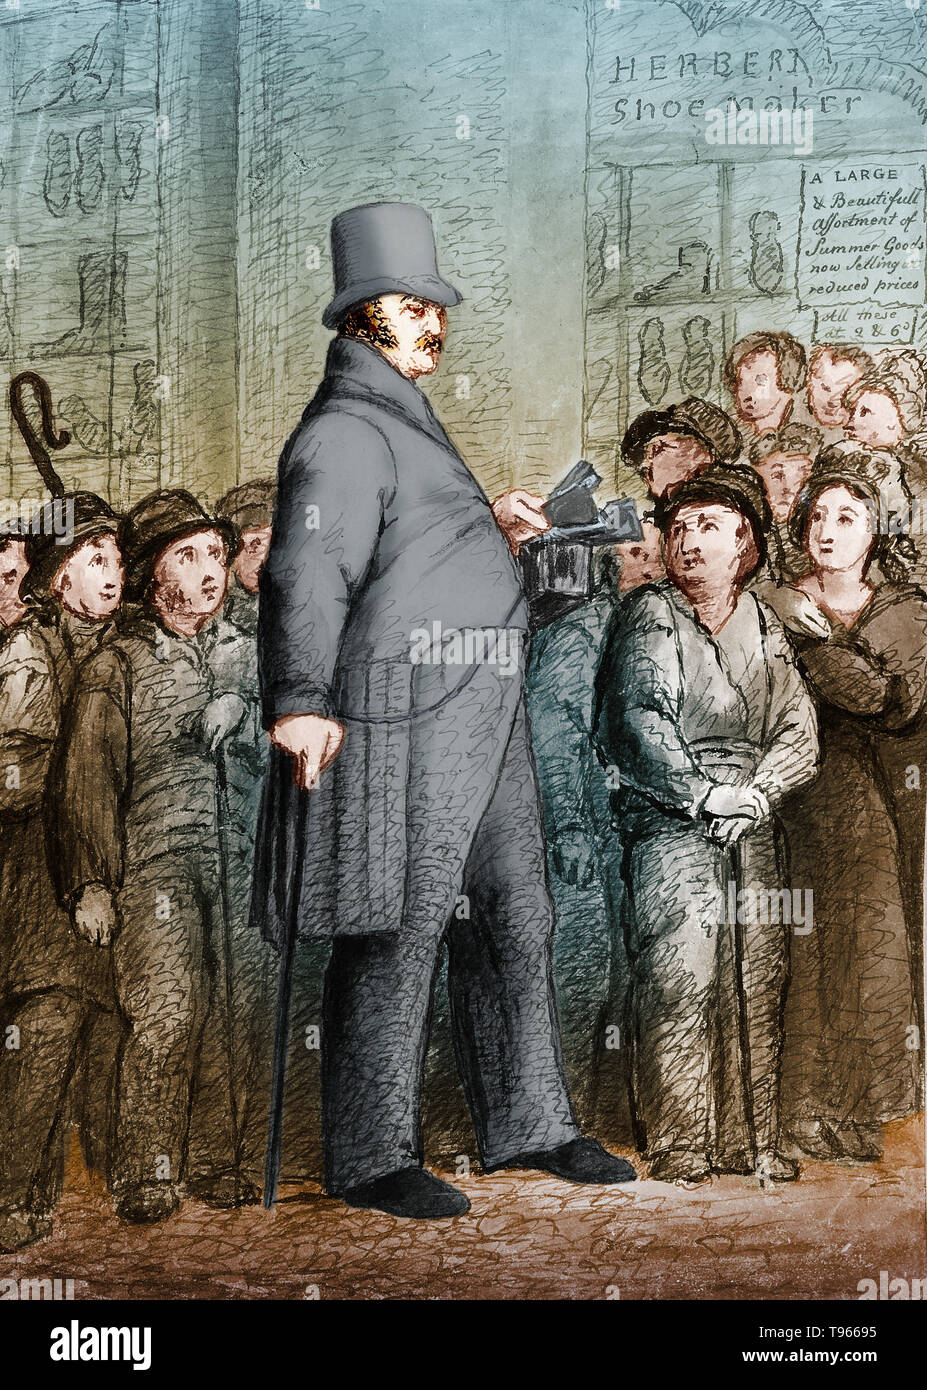 James Henry Lambier, also known as the American Giant, exhibited himself in 1825. Before becoming a professional giant he was a captain in the French Imperial Mameluke Horse Guard. He was just over seven feet tall. Stock Photo